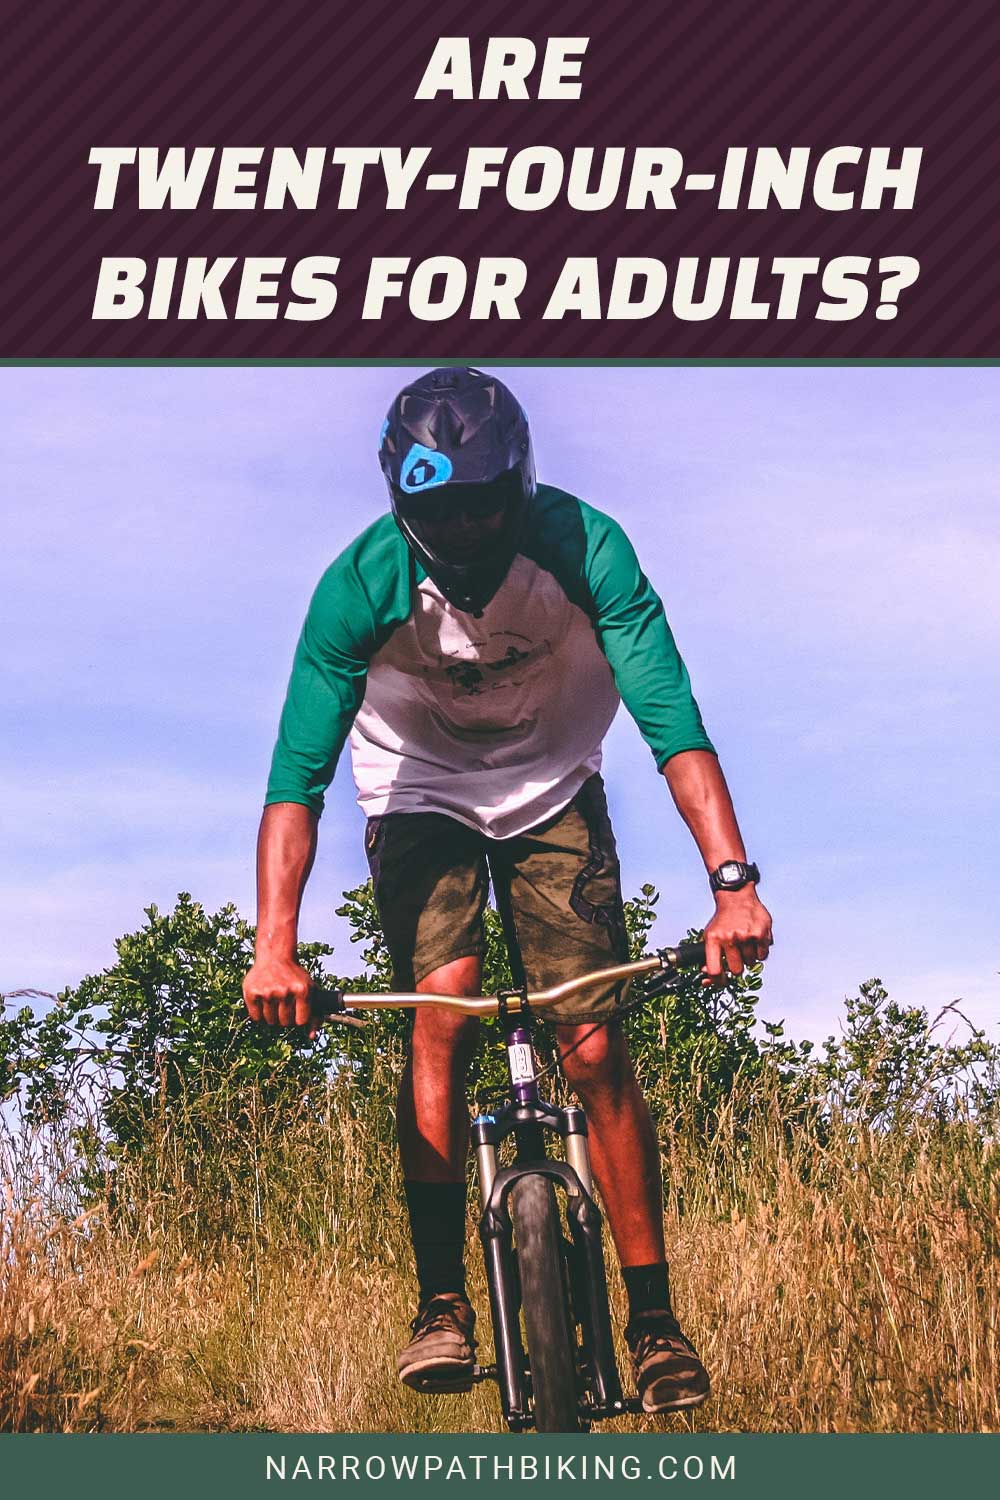 Man riding a bike - Are Twenty-Four-Inch Bikes For Adults?